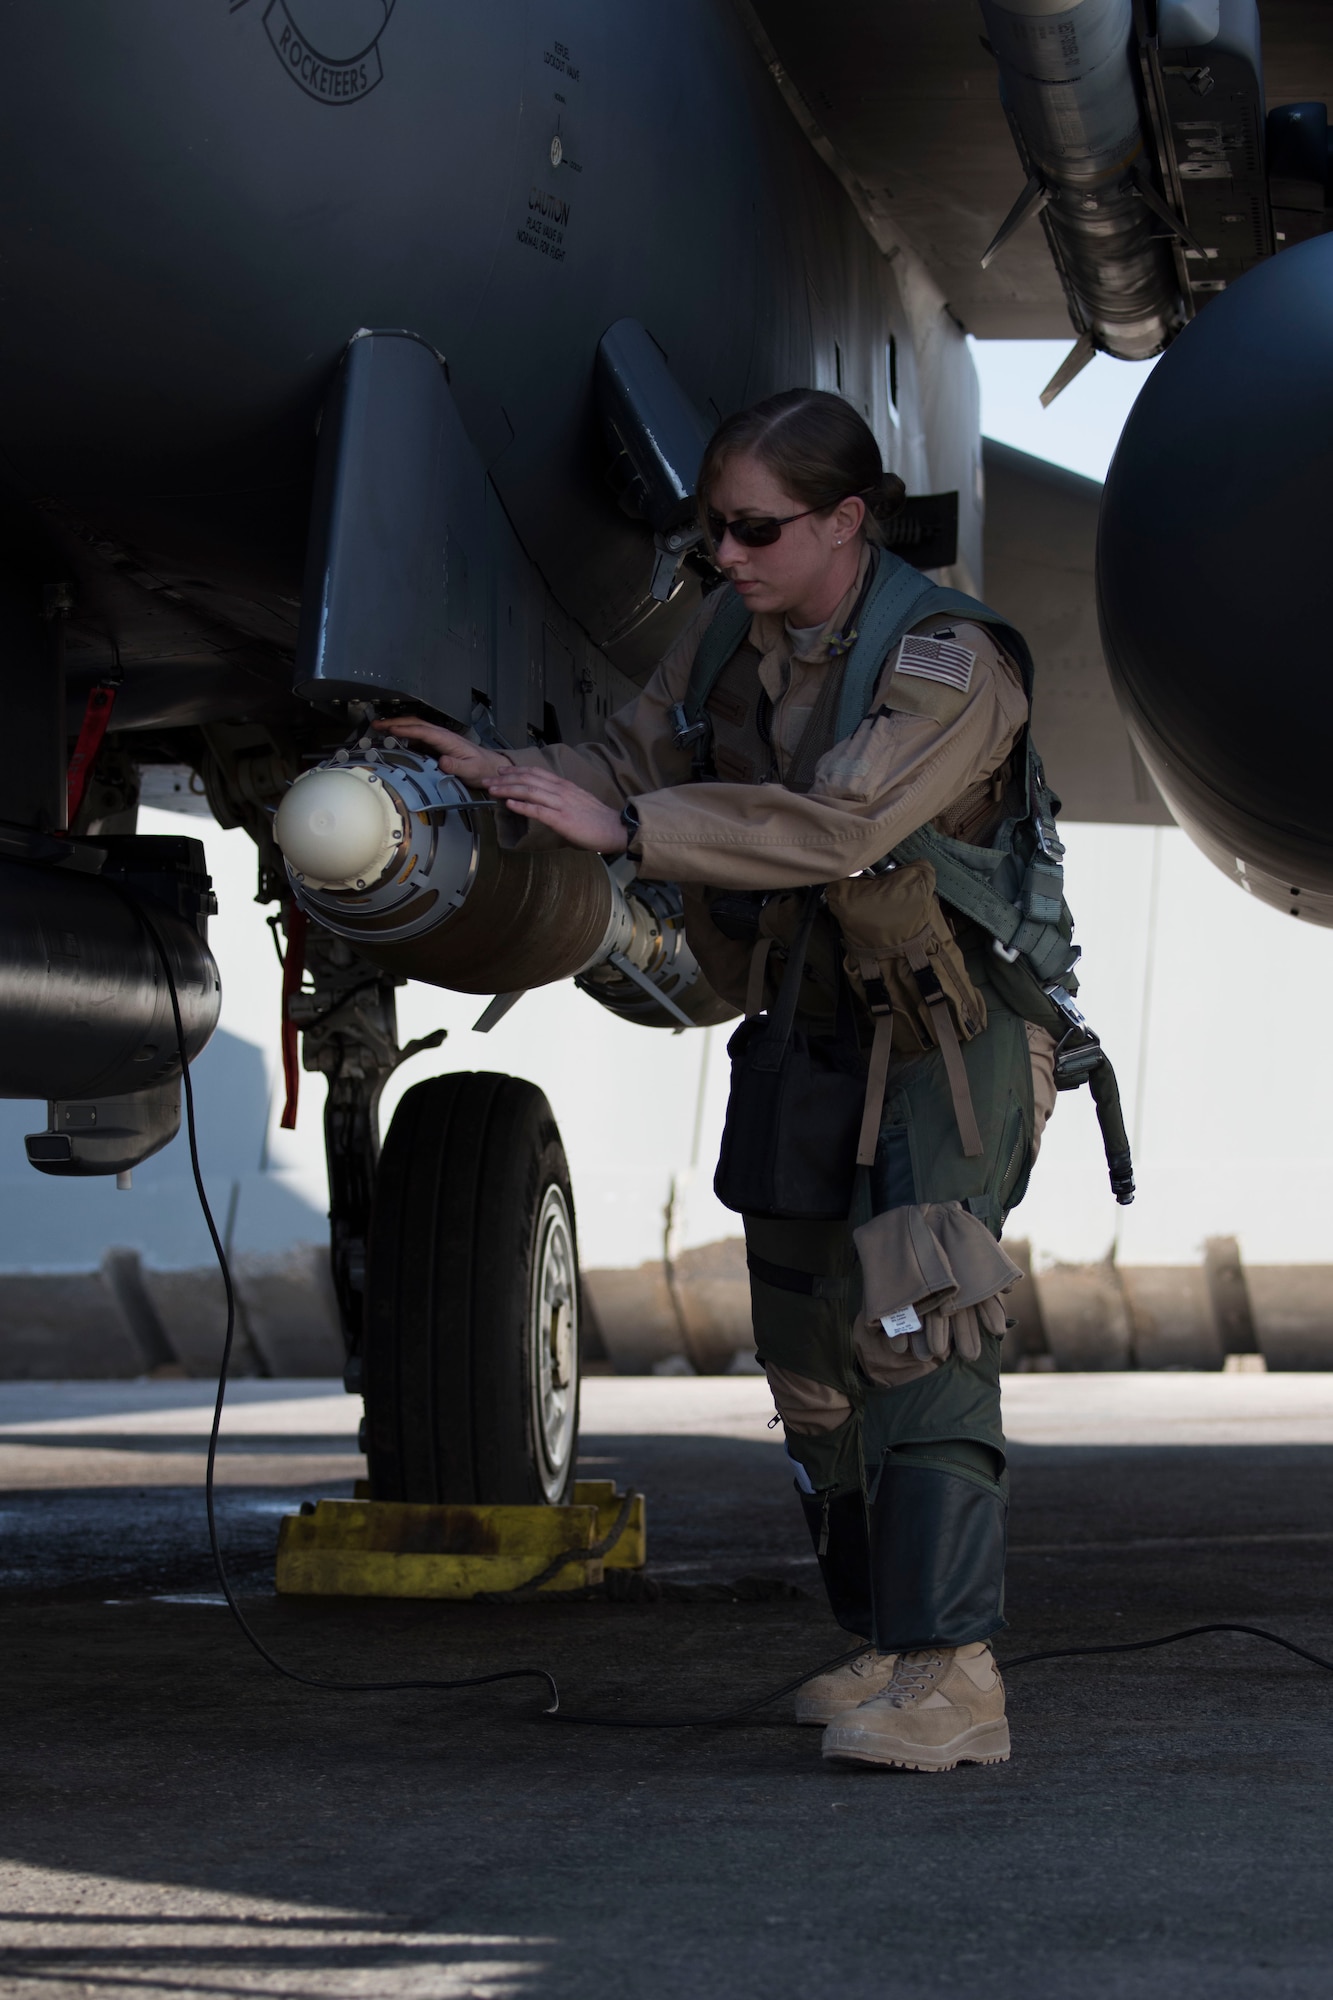 Capt. Jessica Niswonger, 332nd Air Expeditionary Fighter Squadron assistant chief and weapon system officer, examines an F-15E Strike Eagle as part of pre-checks prior to launch March 7, 2018, at an undisclosed location in Southeast Asia.